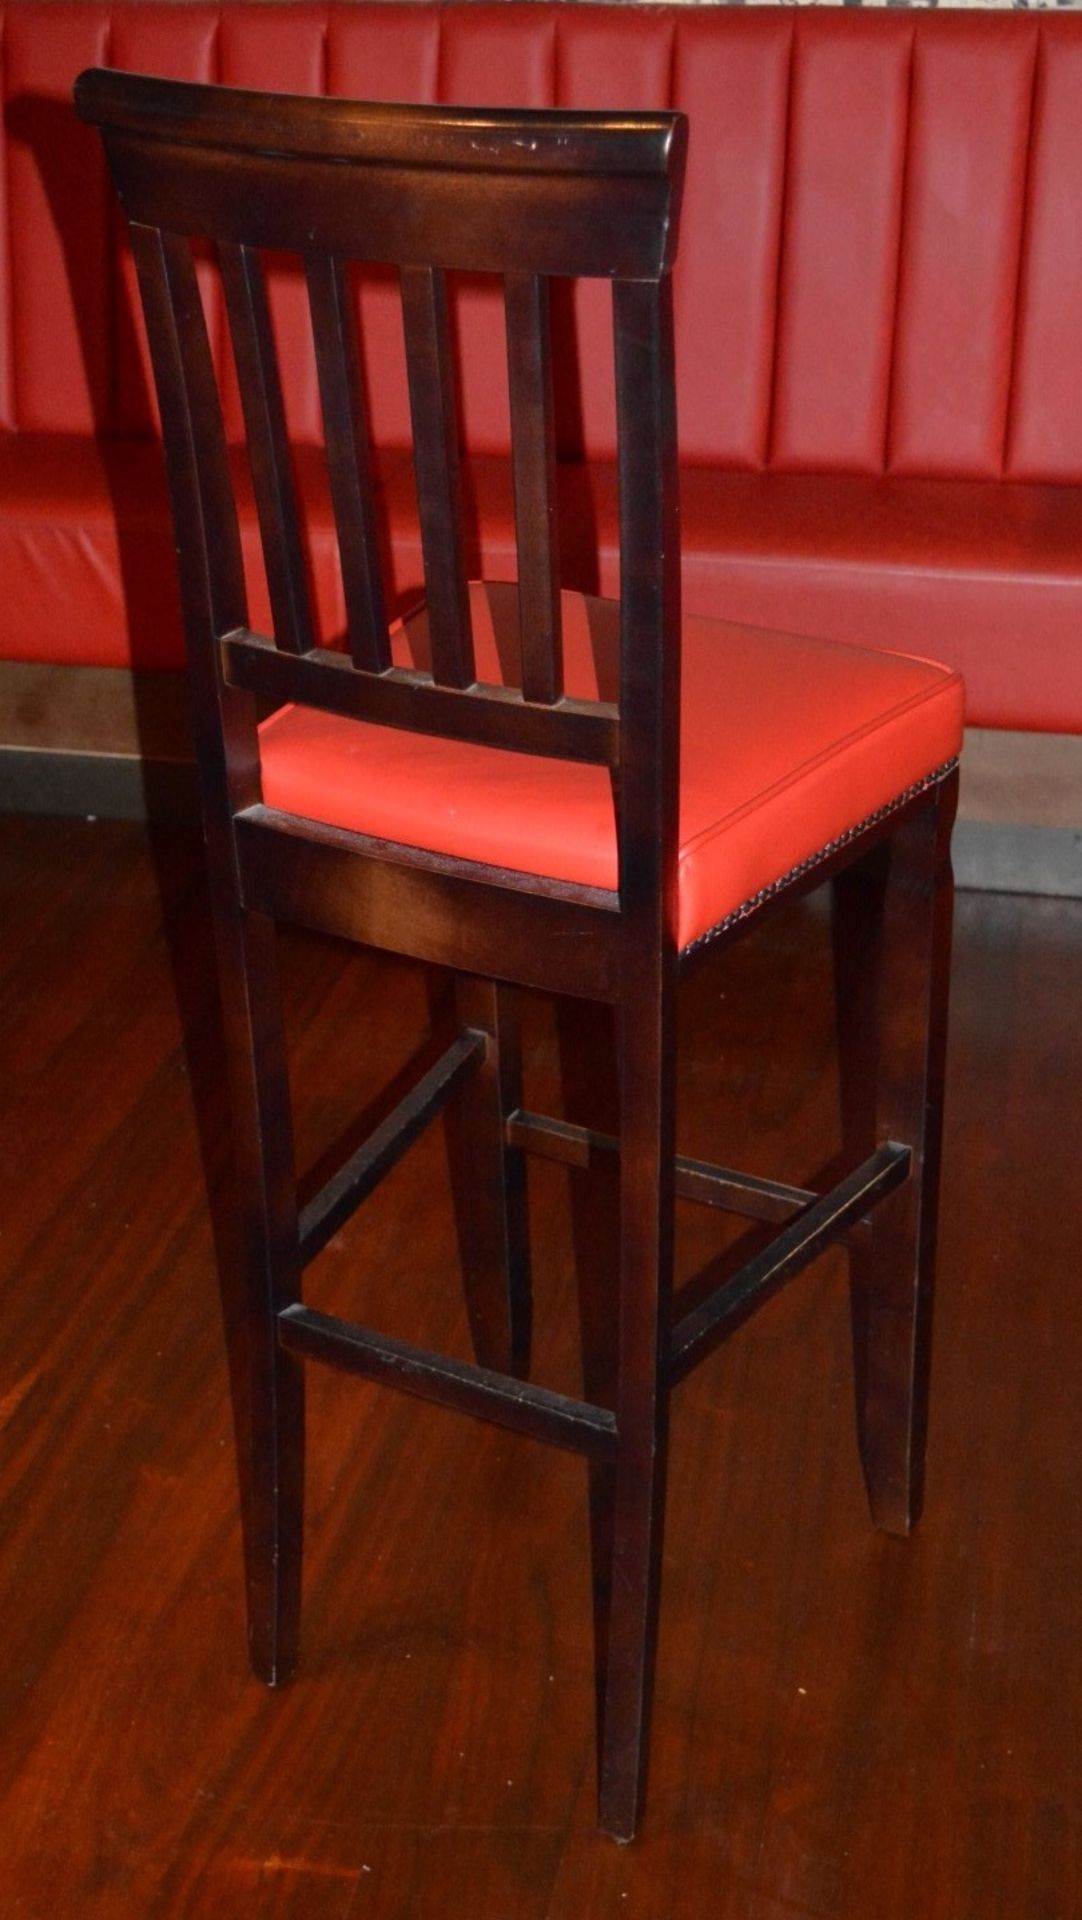 10 x Tall 'Harley' Bar Stools - Recently Removed From A City Centre Restaurant - Image 5 of 5